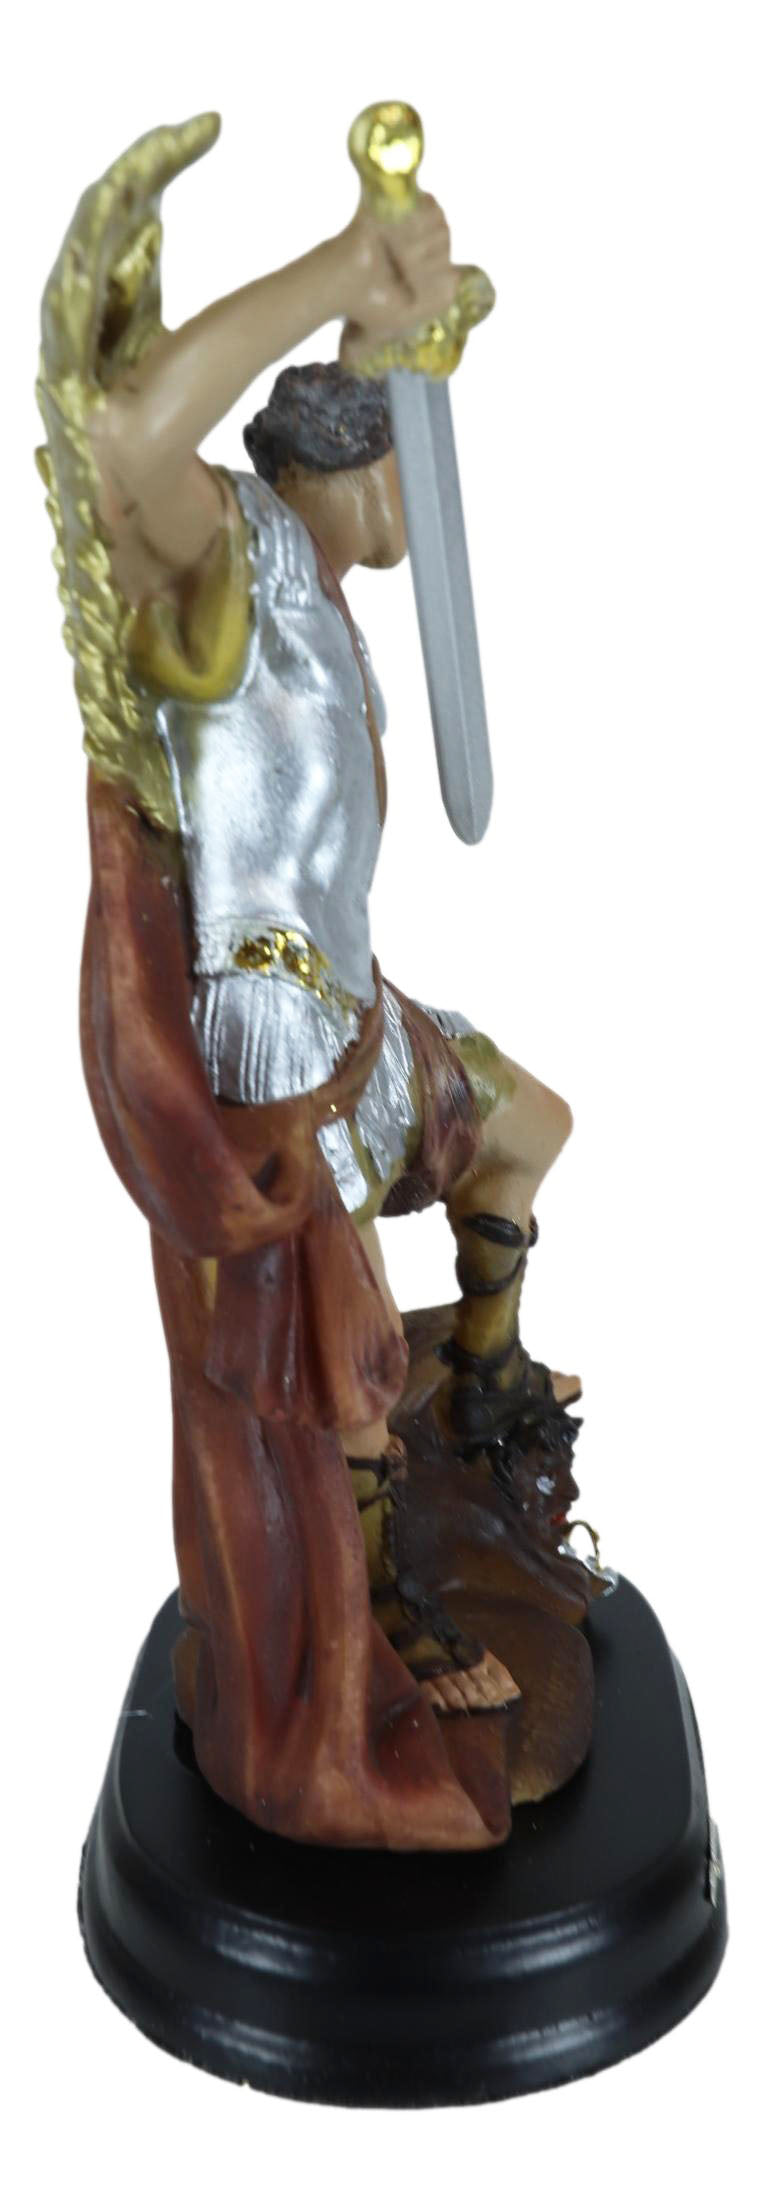 Archangel Michael God's General 5" Inch Holy Religious Figurine Altar Sculpture